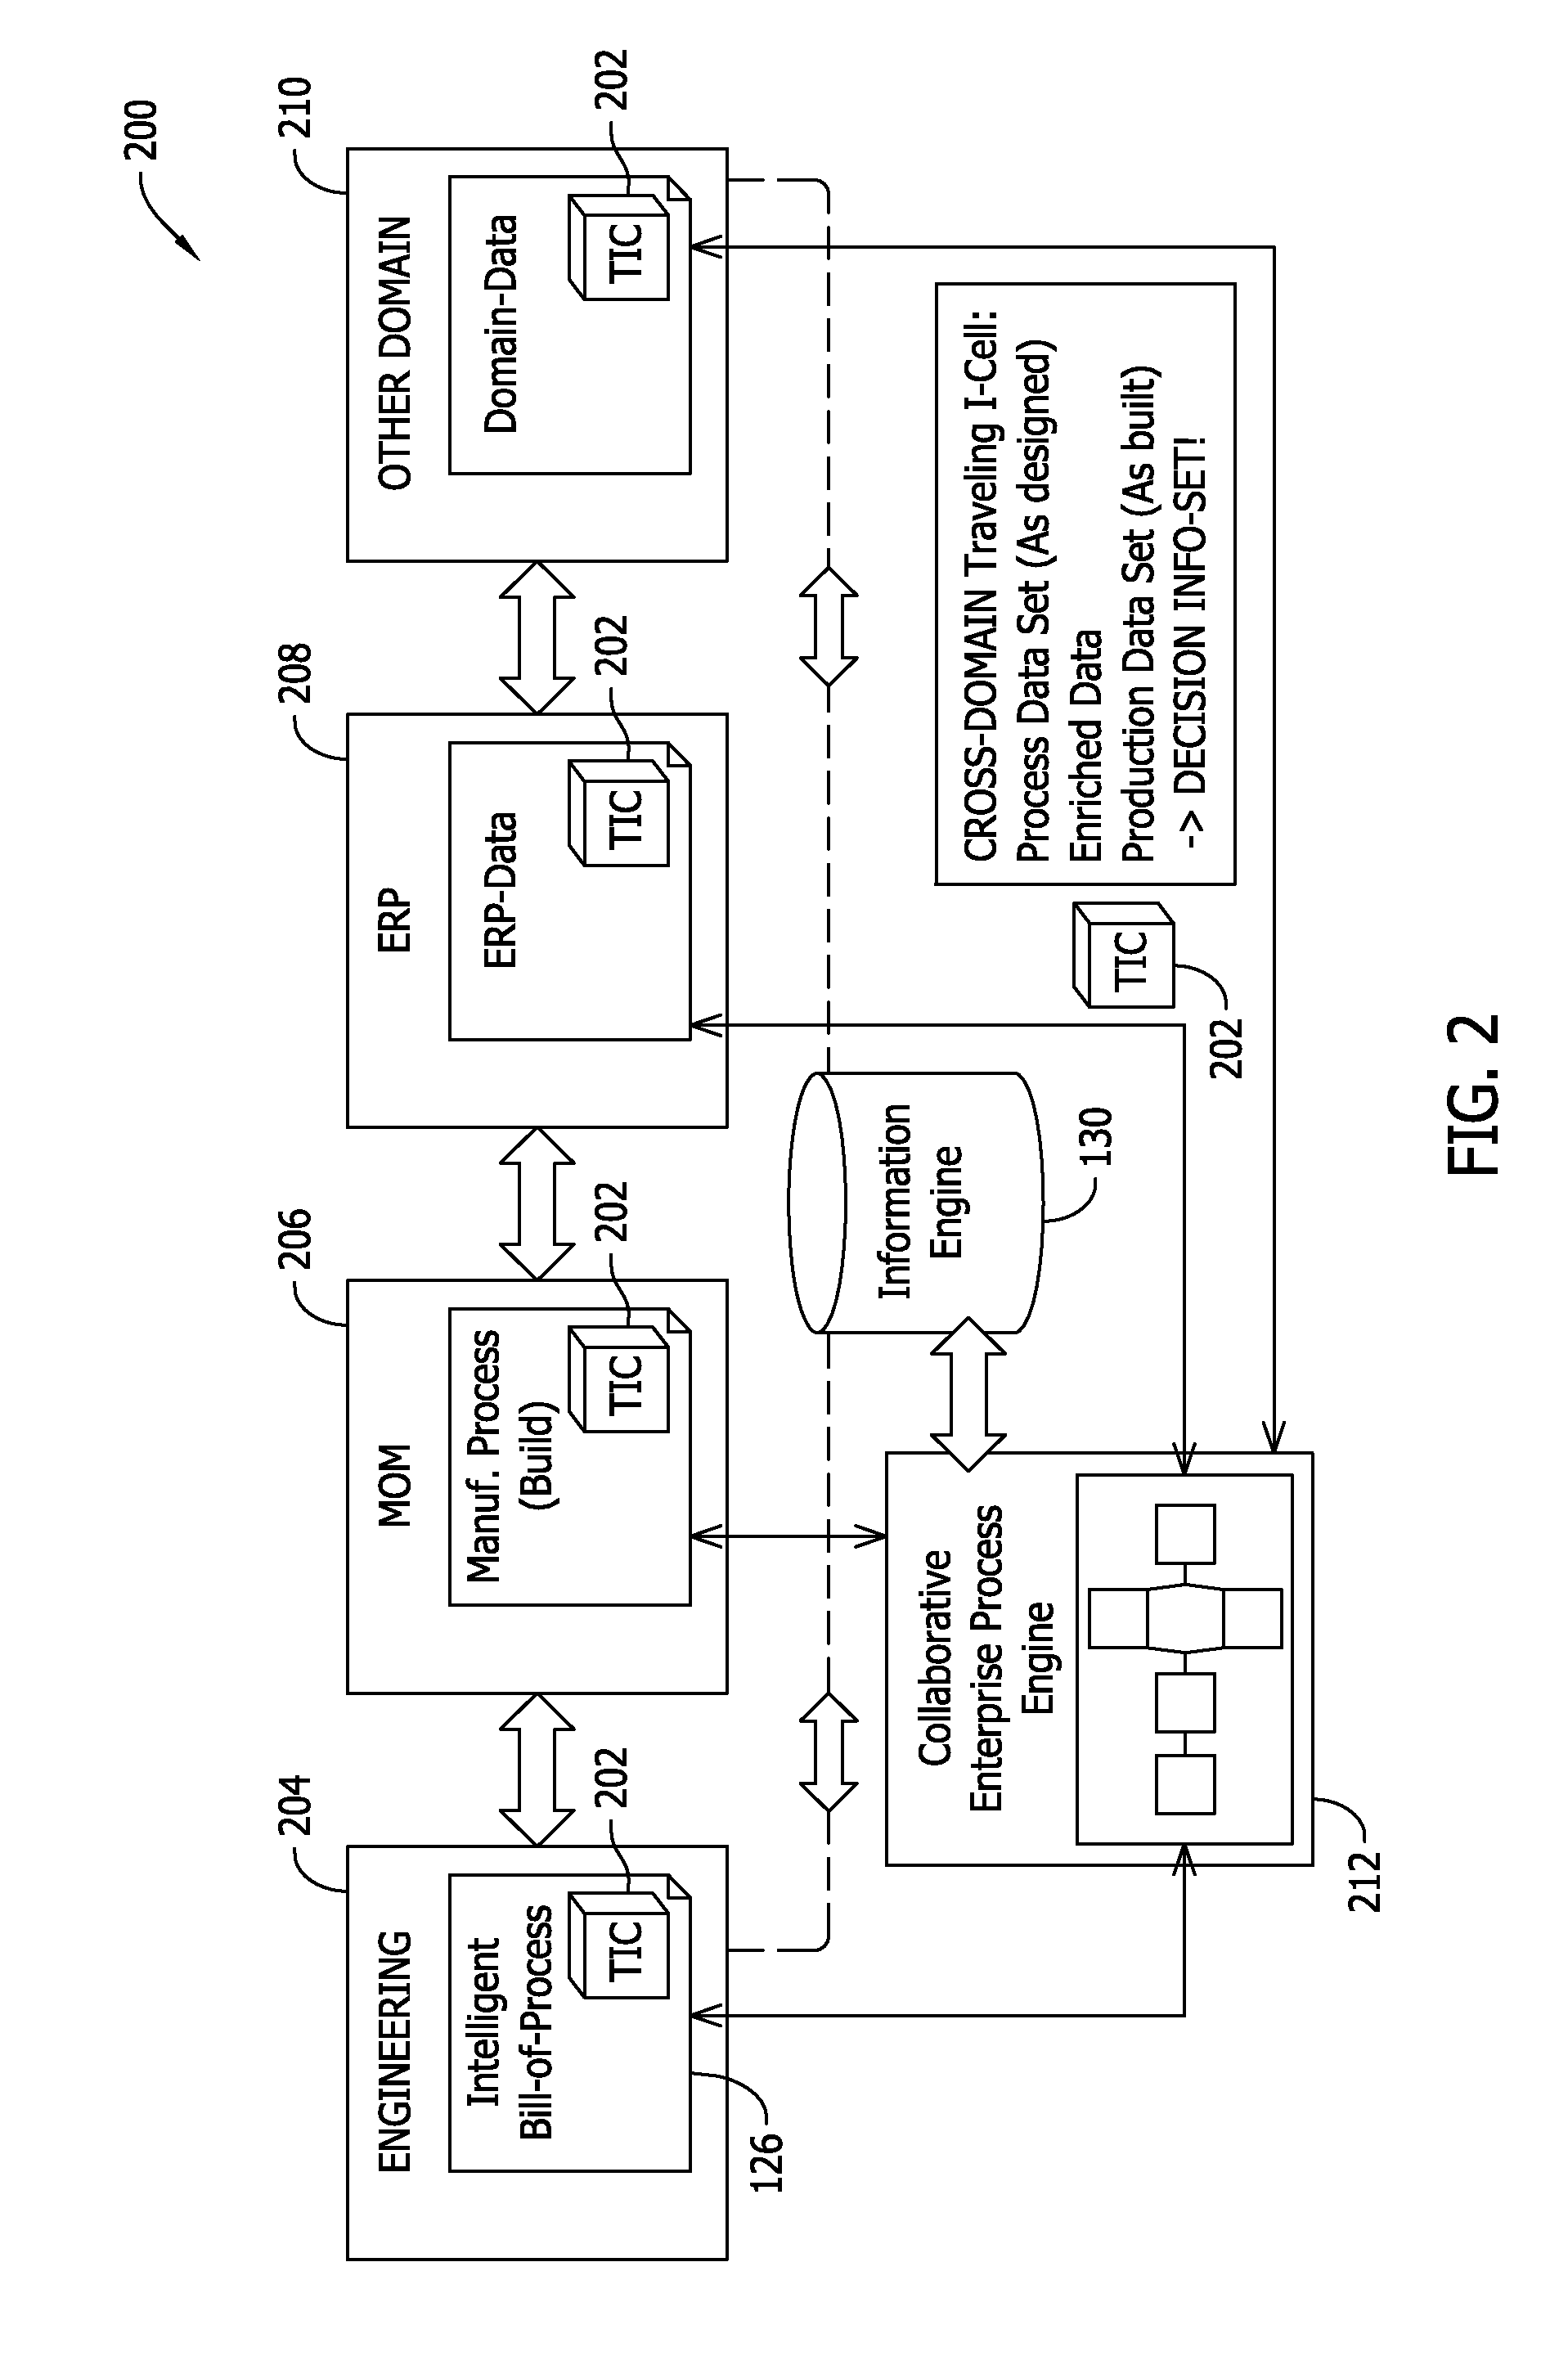 Method and system for an information engine for analytics and decision-making